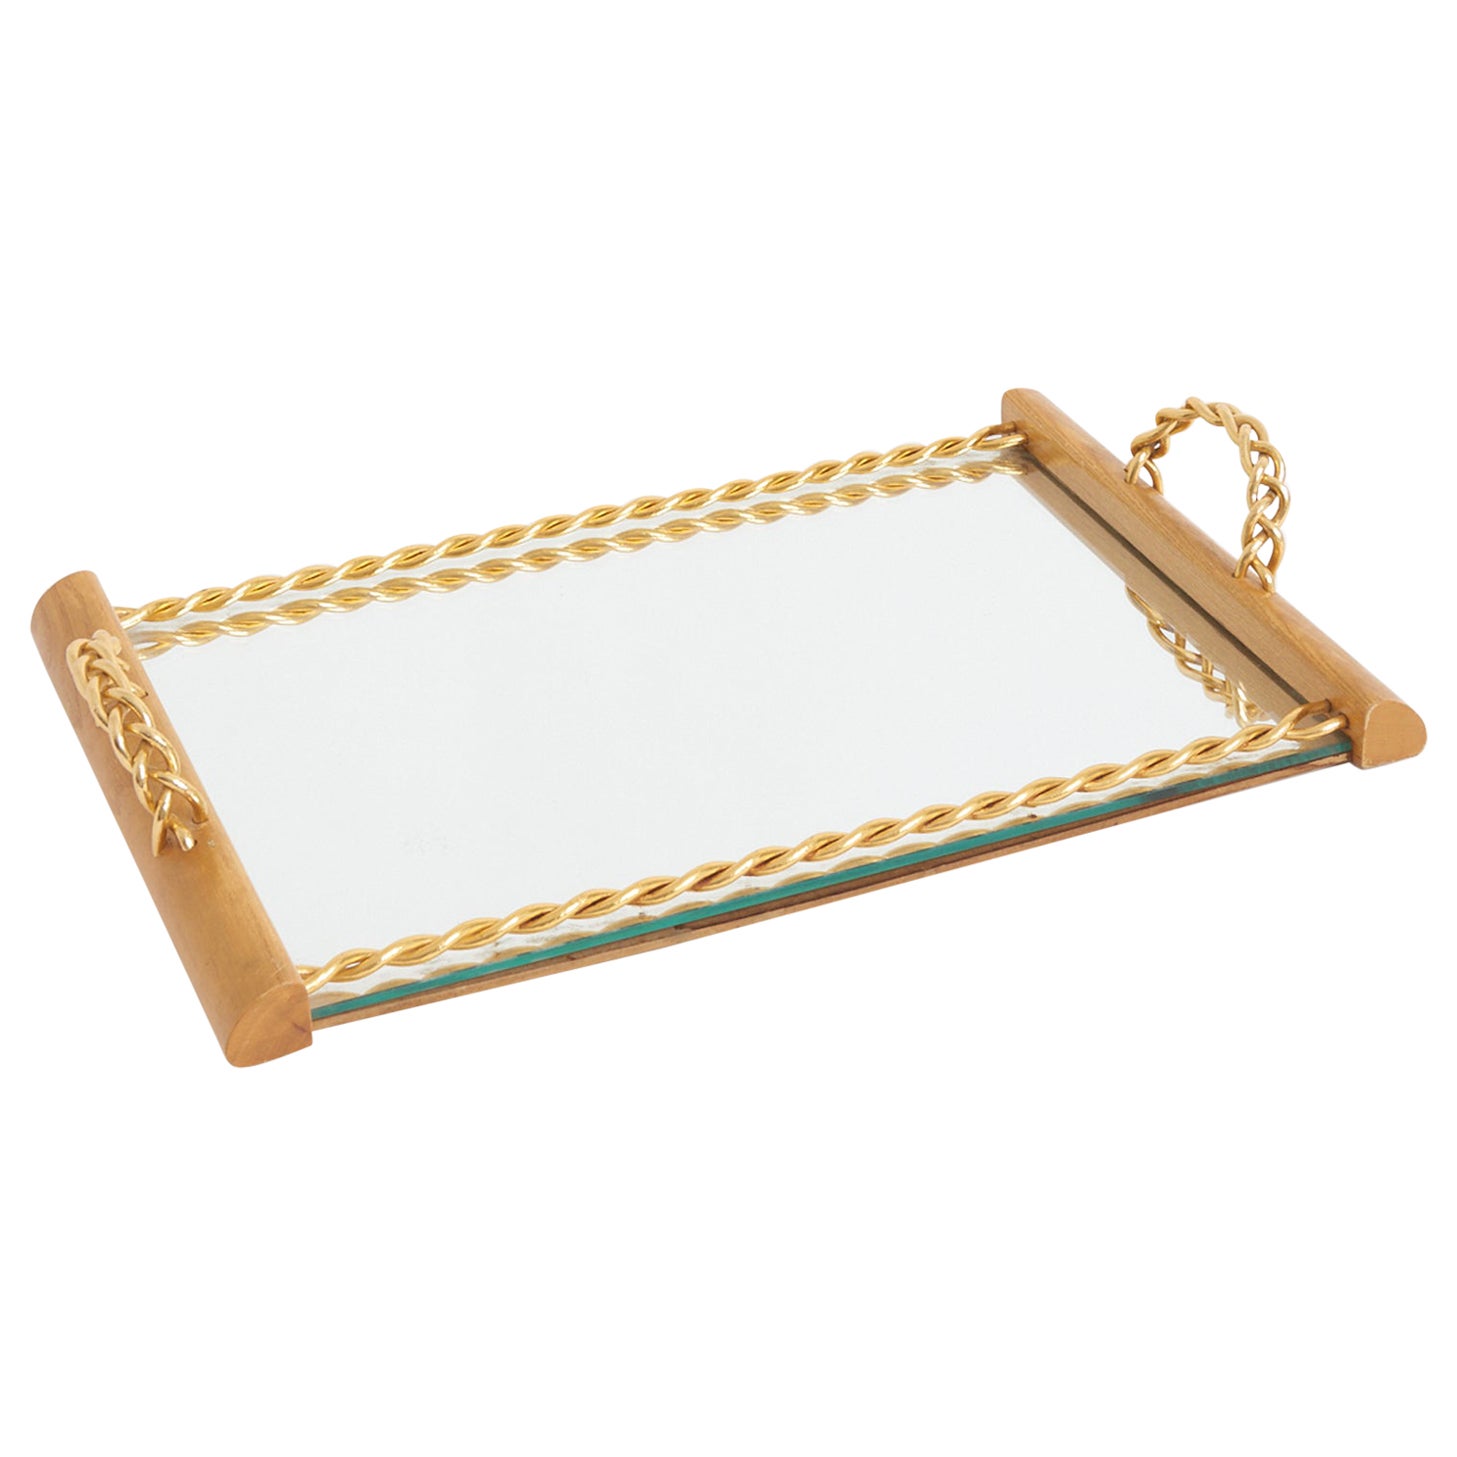 1940s Mirrored Tray For Sale